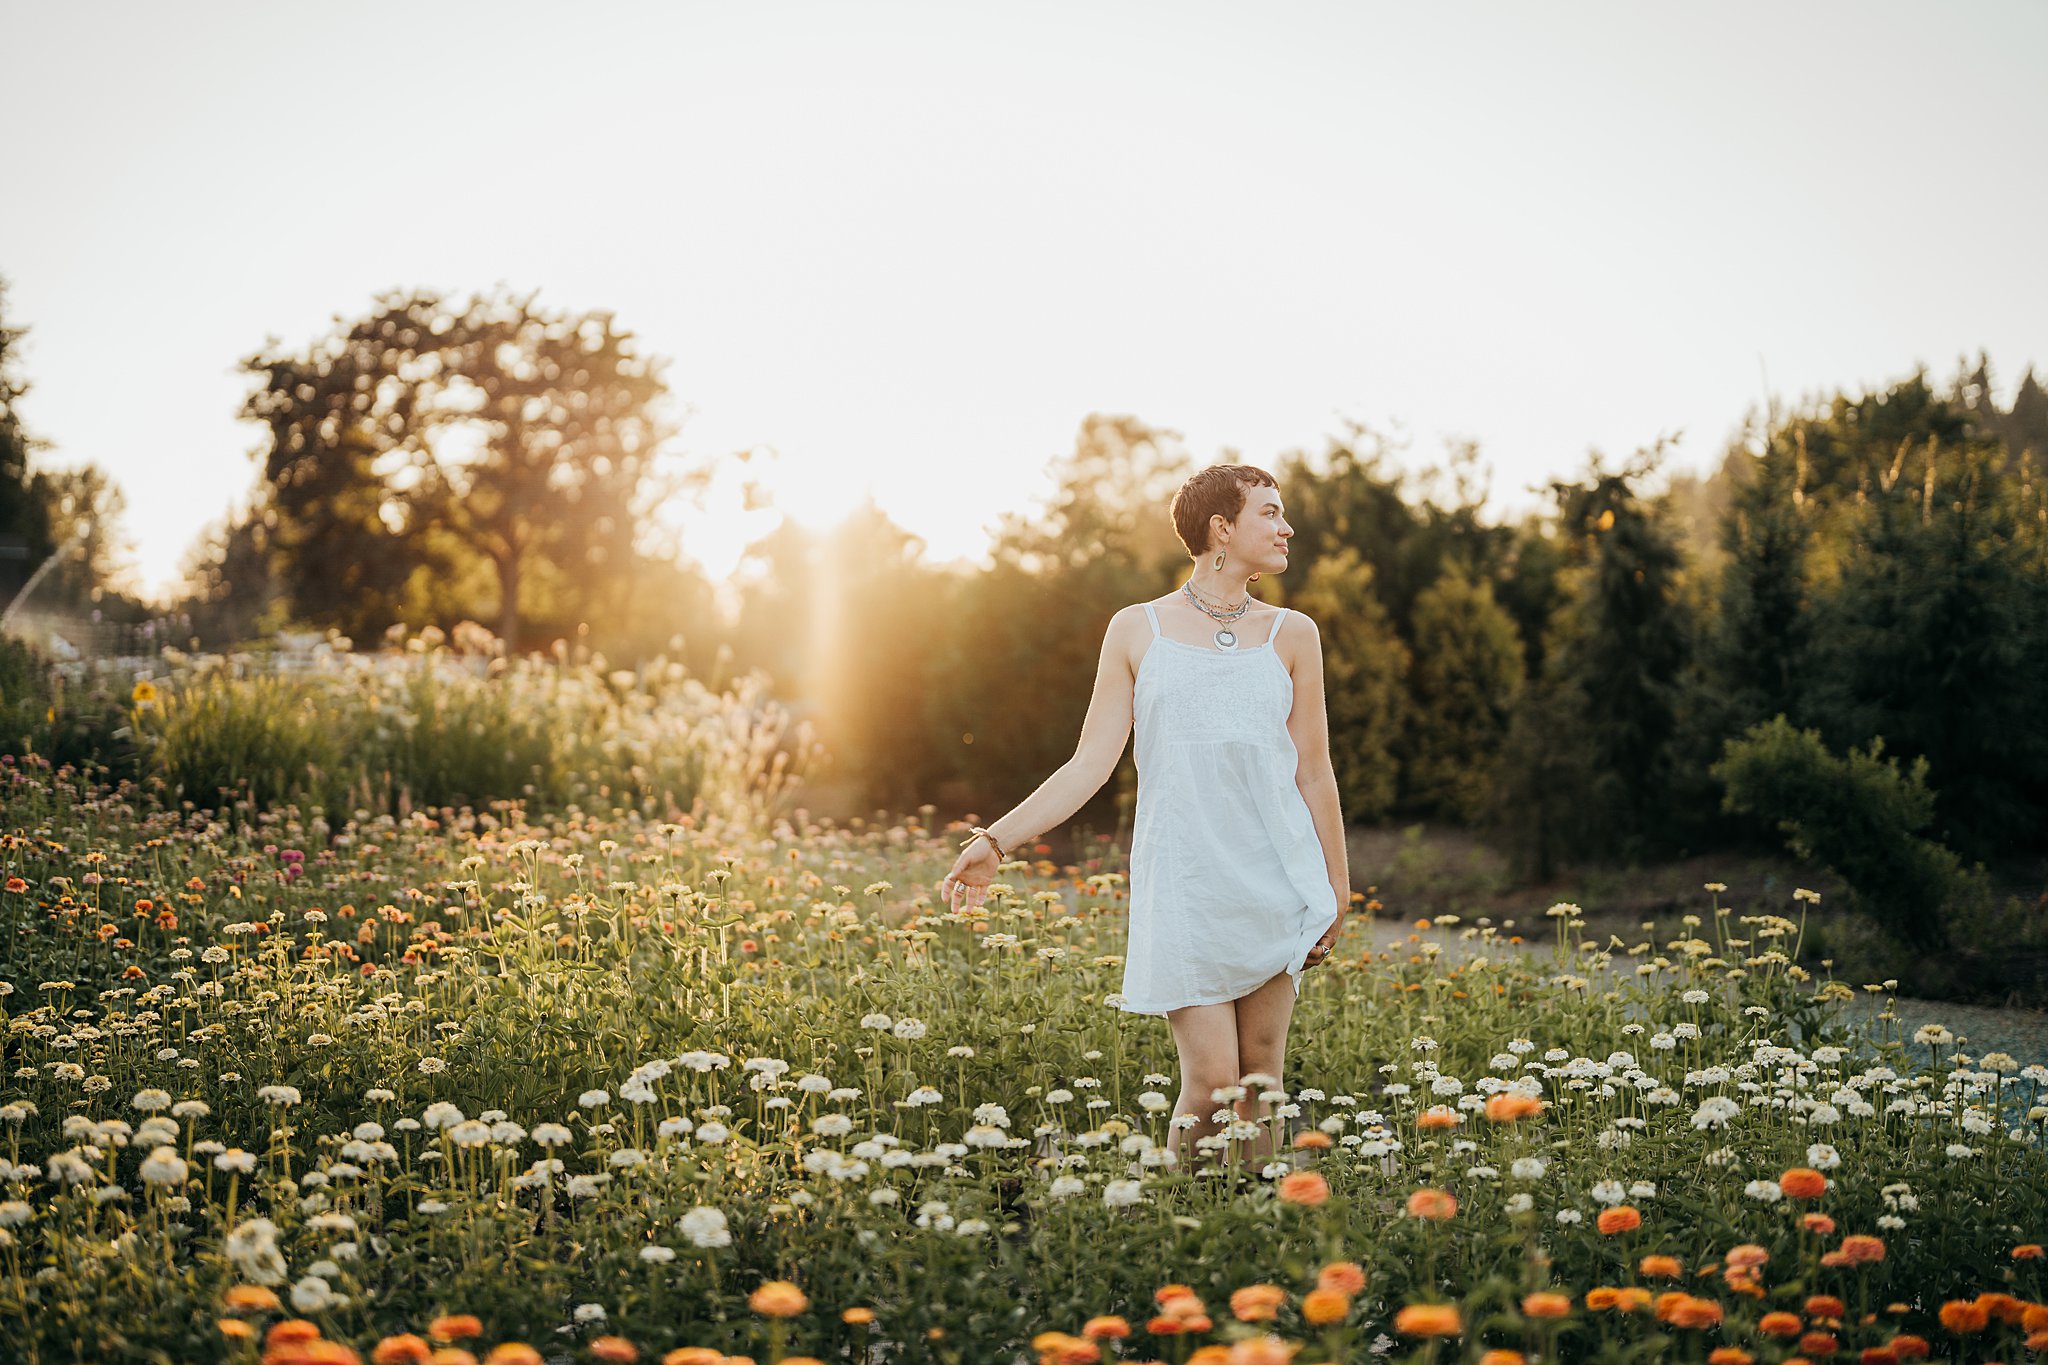 A woman in a white dress stands in a field of colorful daisies at sunset Seattle Photoshoot Locations